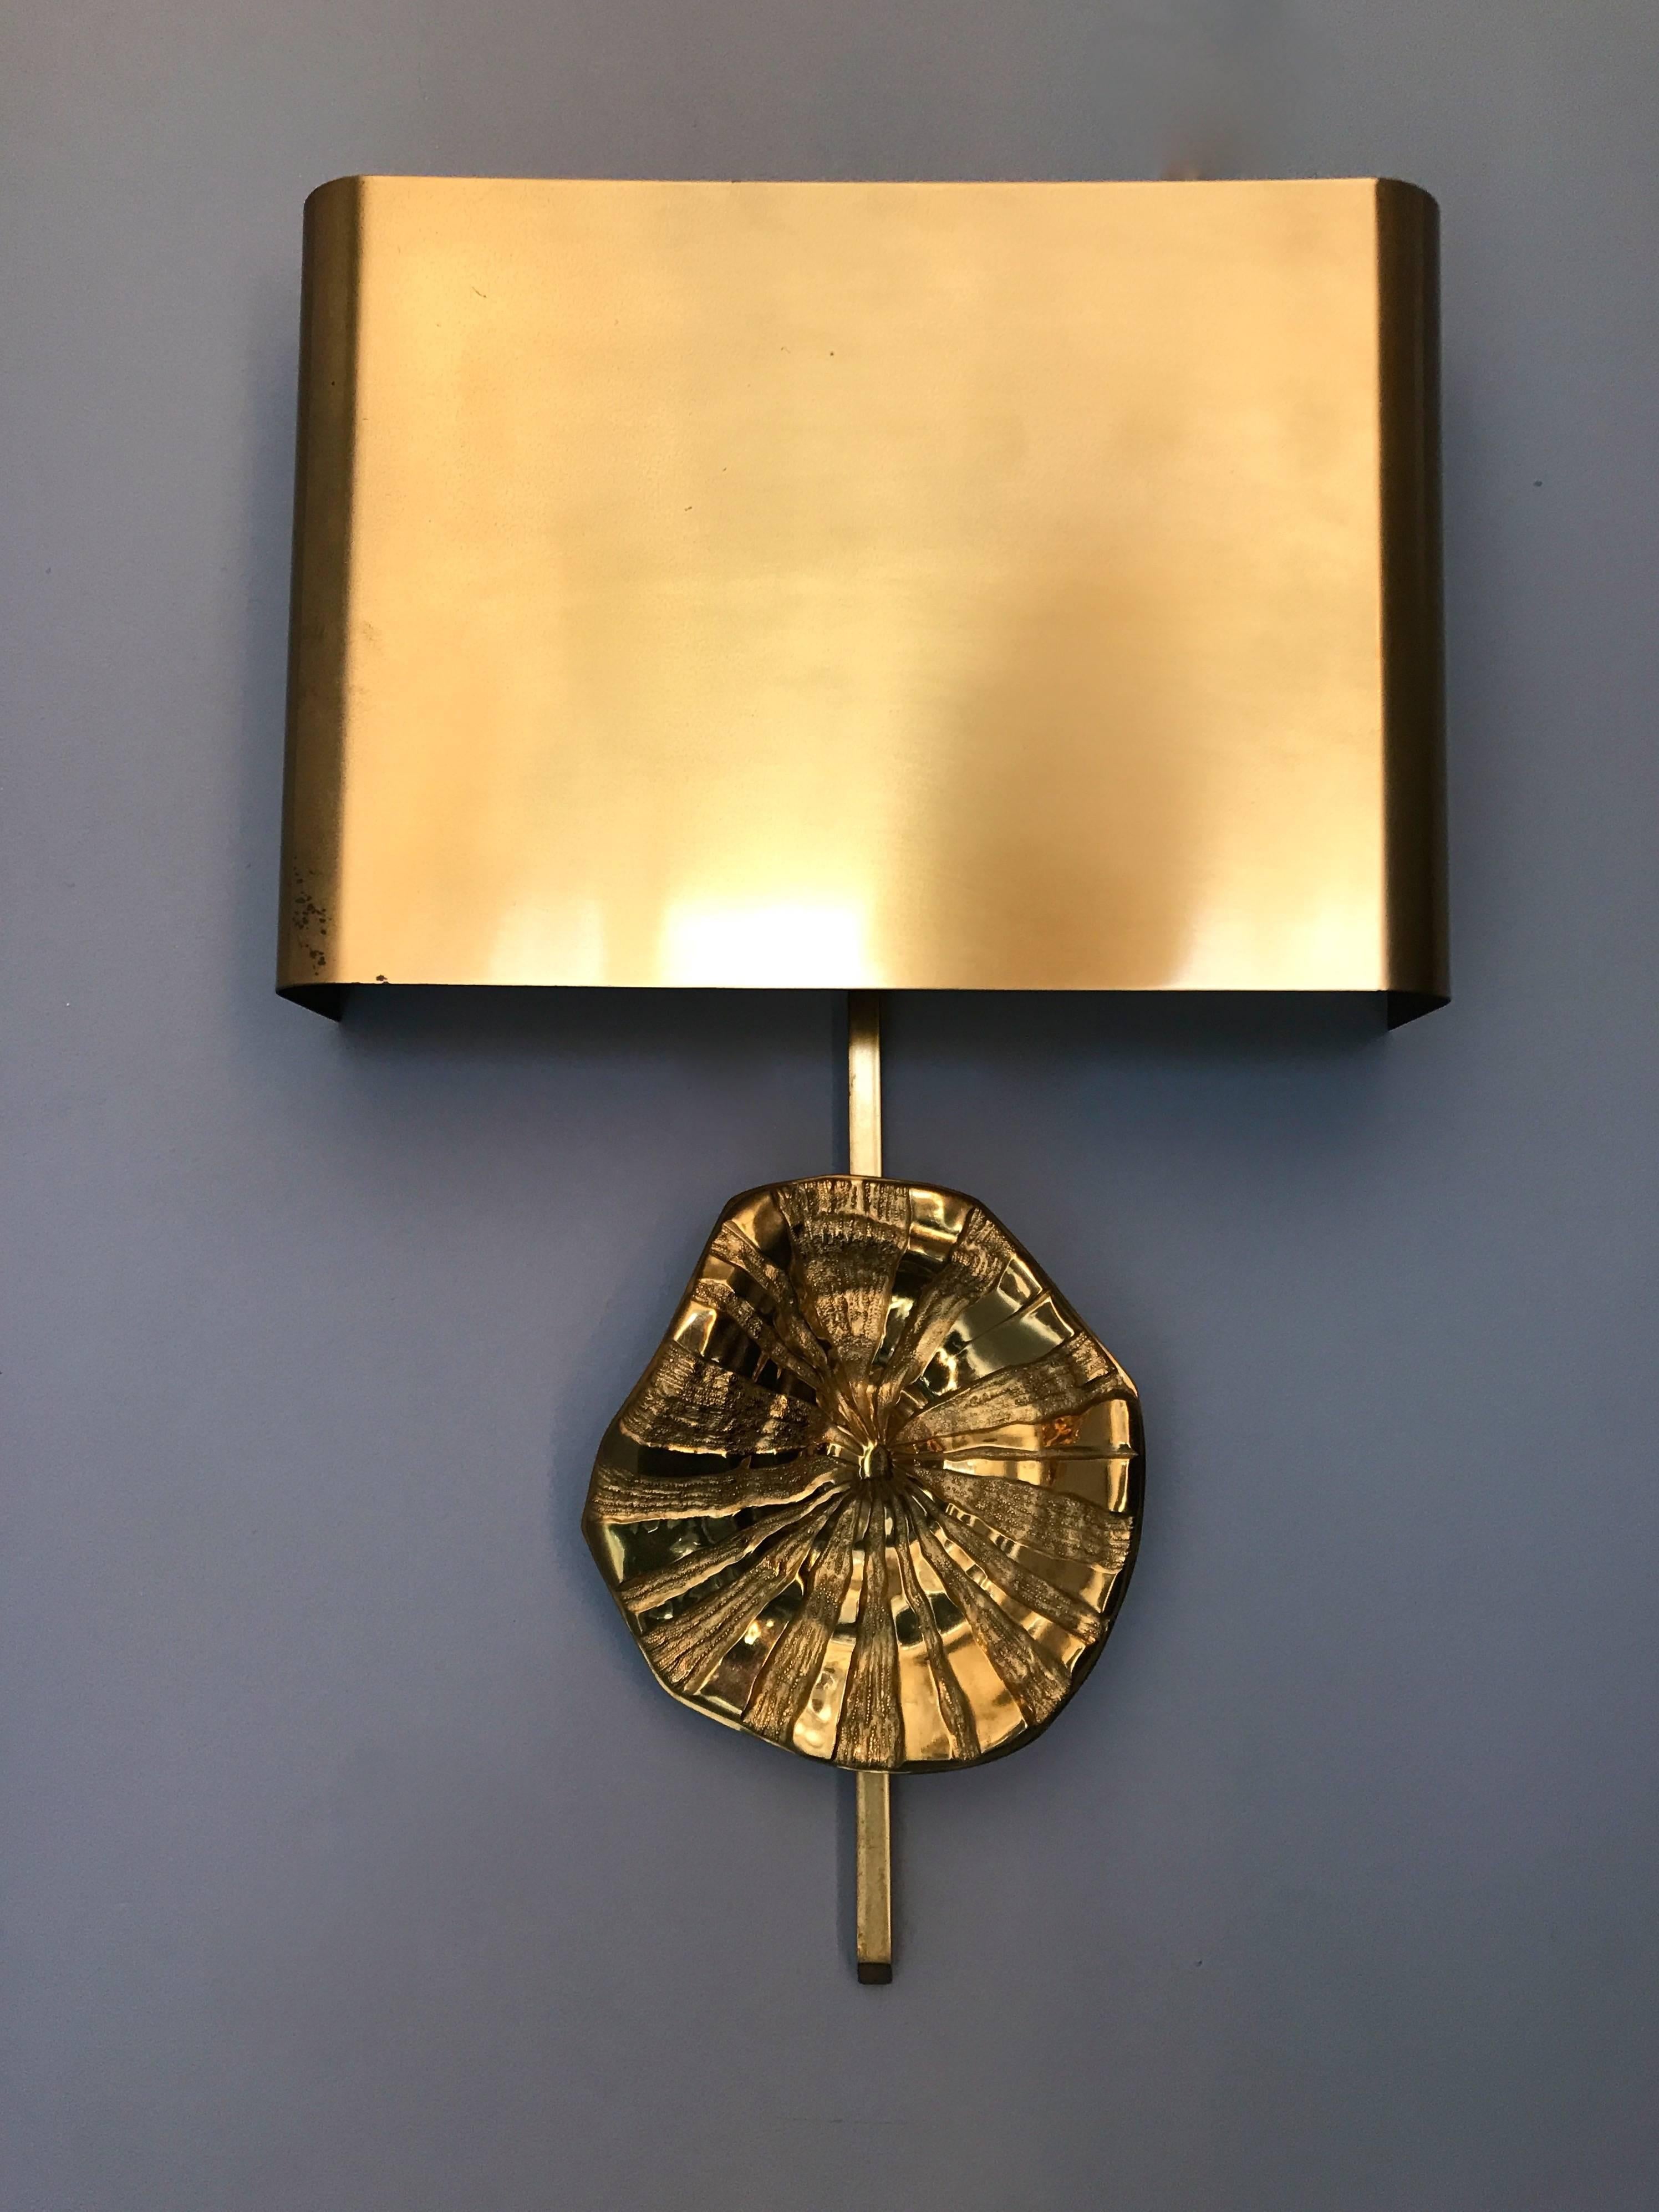 Rare pair of sconces or wall lights model Fongia sea fossil by Jacques Charles for Maison Charles. Full bronze, brass shade,  hallmark stamp on the back Charles made in France. Can be prepare for E12 bulbs the US/UK norm. Famous manufacture and